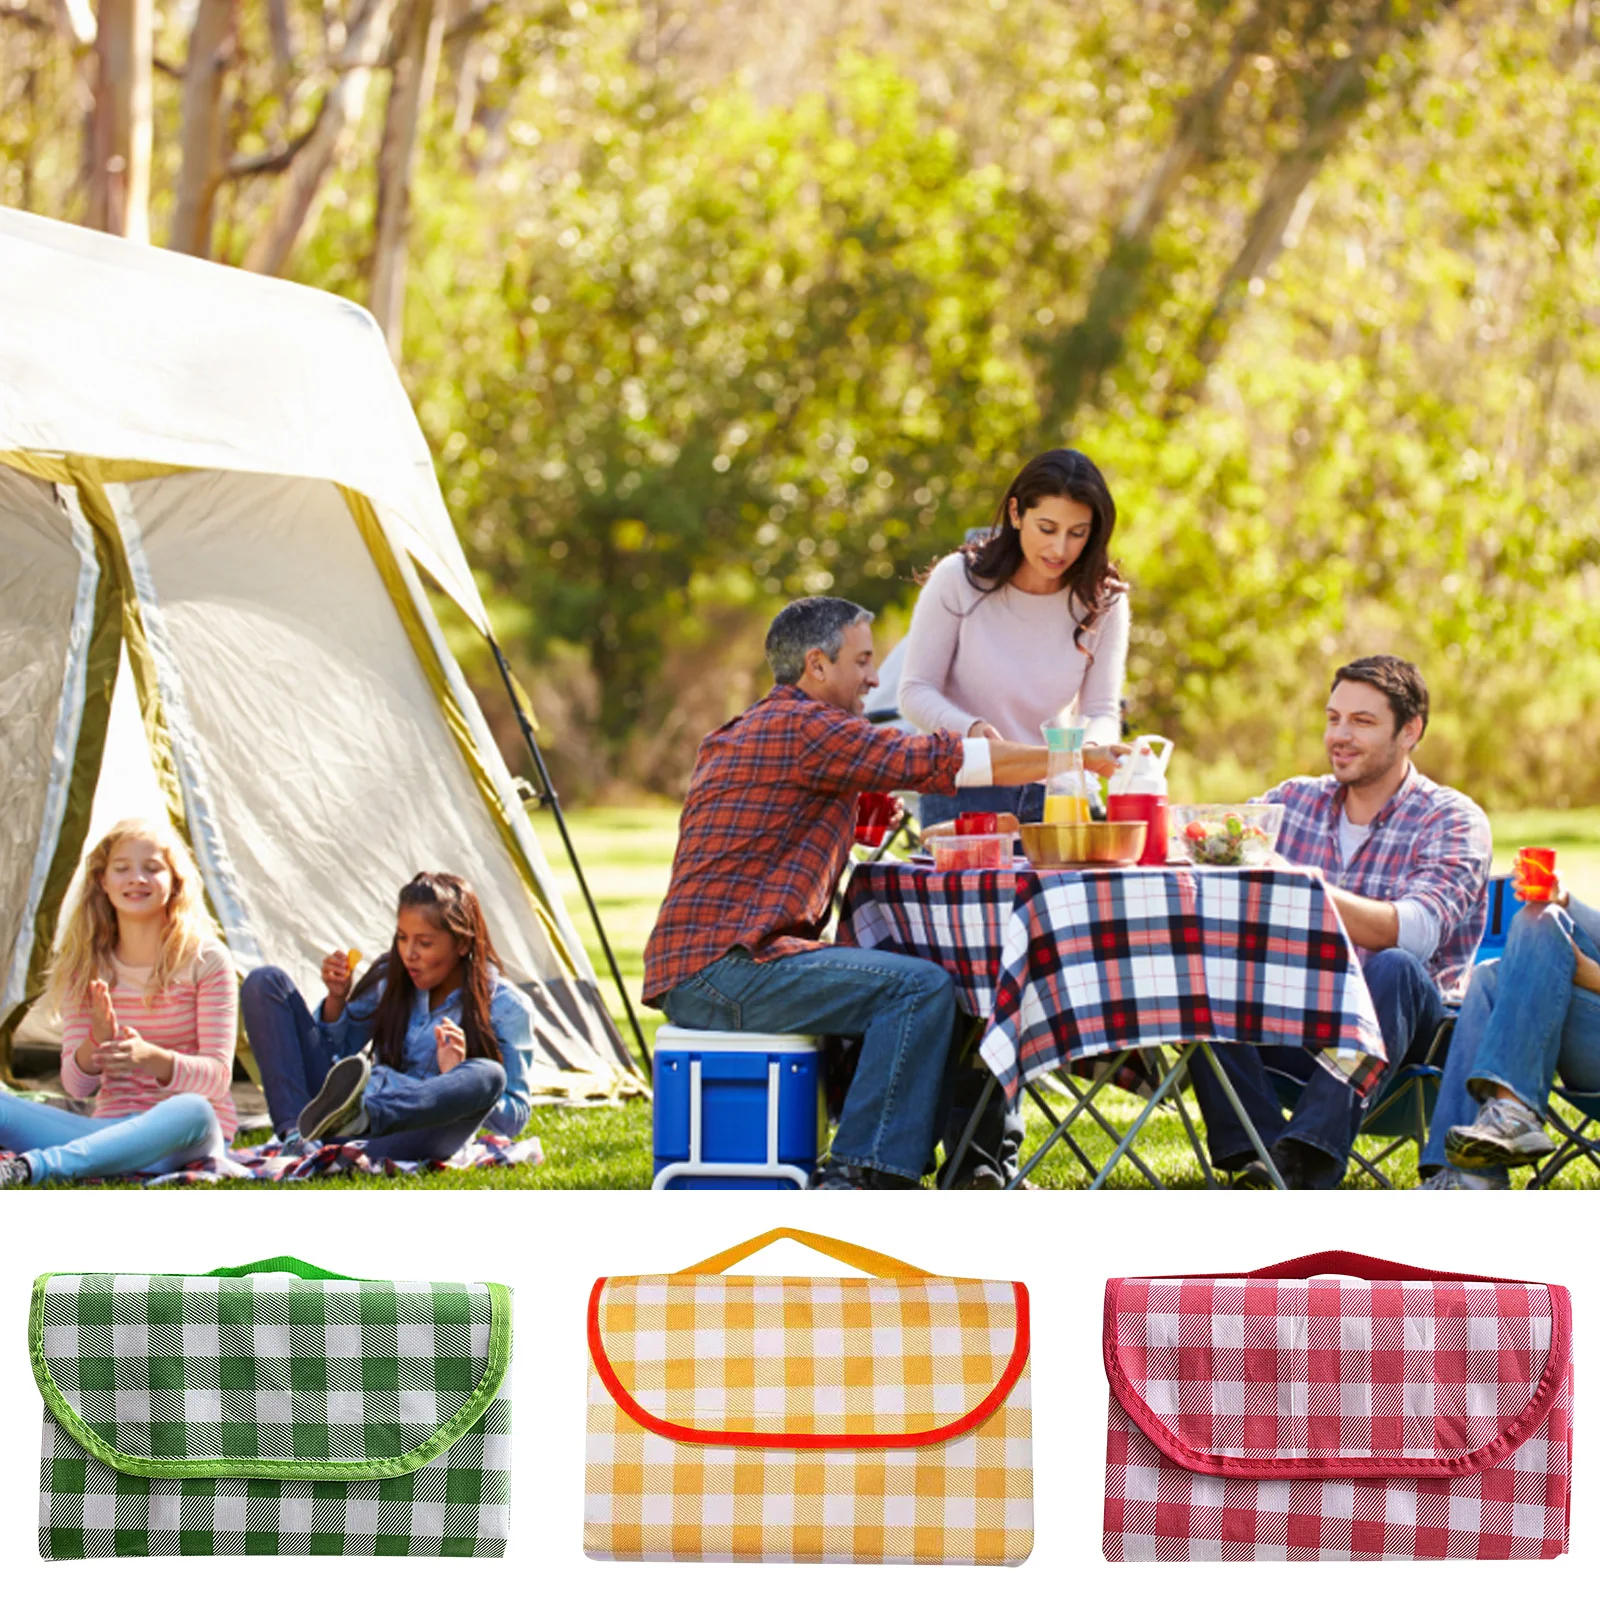  Picnic Blankets 79x79, Waterproof Foldable Picnic Mat, Extra  Large Outdoor Blanket for Camping on Grass, Portable Sandproof Beach Blanket  for Travel Hiking, 3 Layer Thick Picnic Rug(Rainbow Pattern) : Patio, Lawn